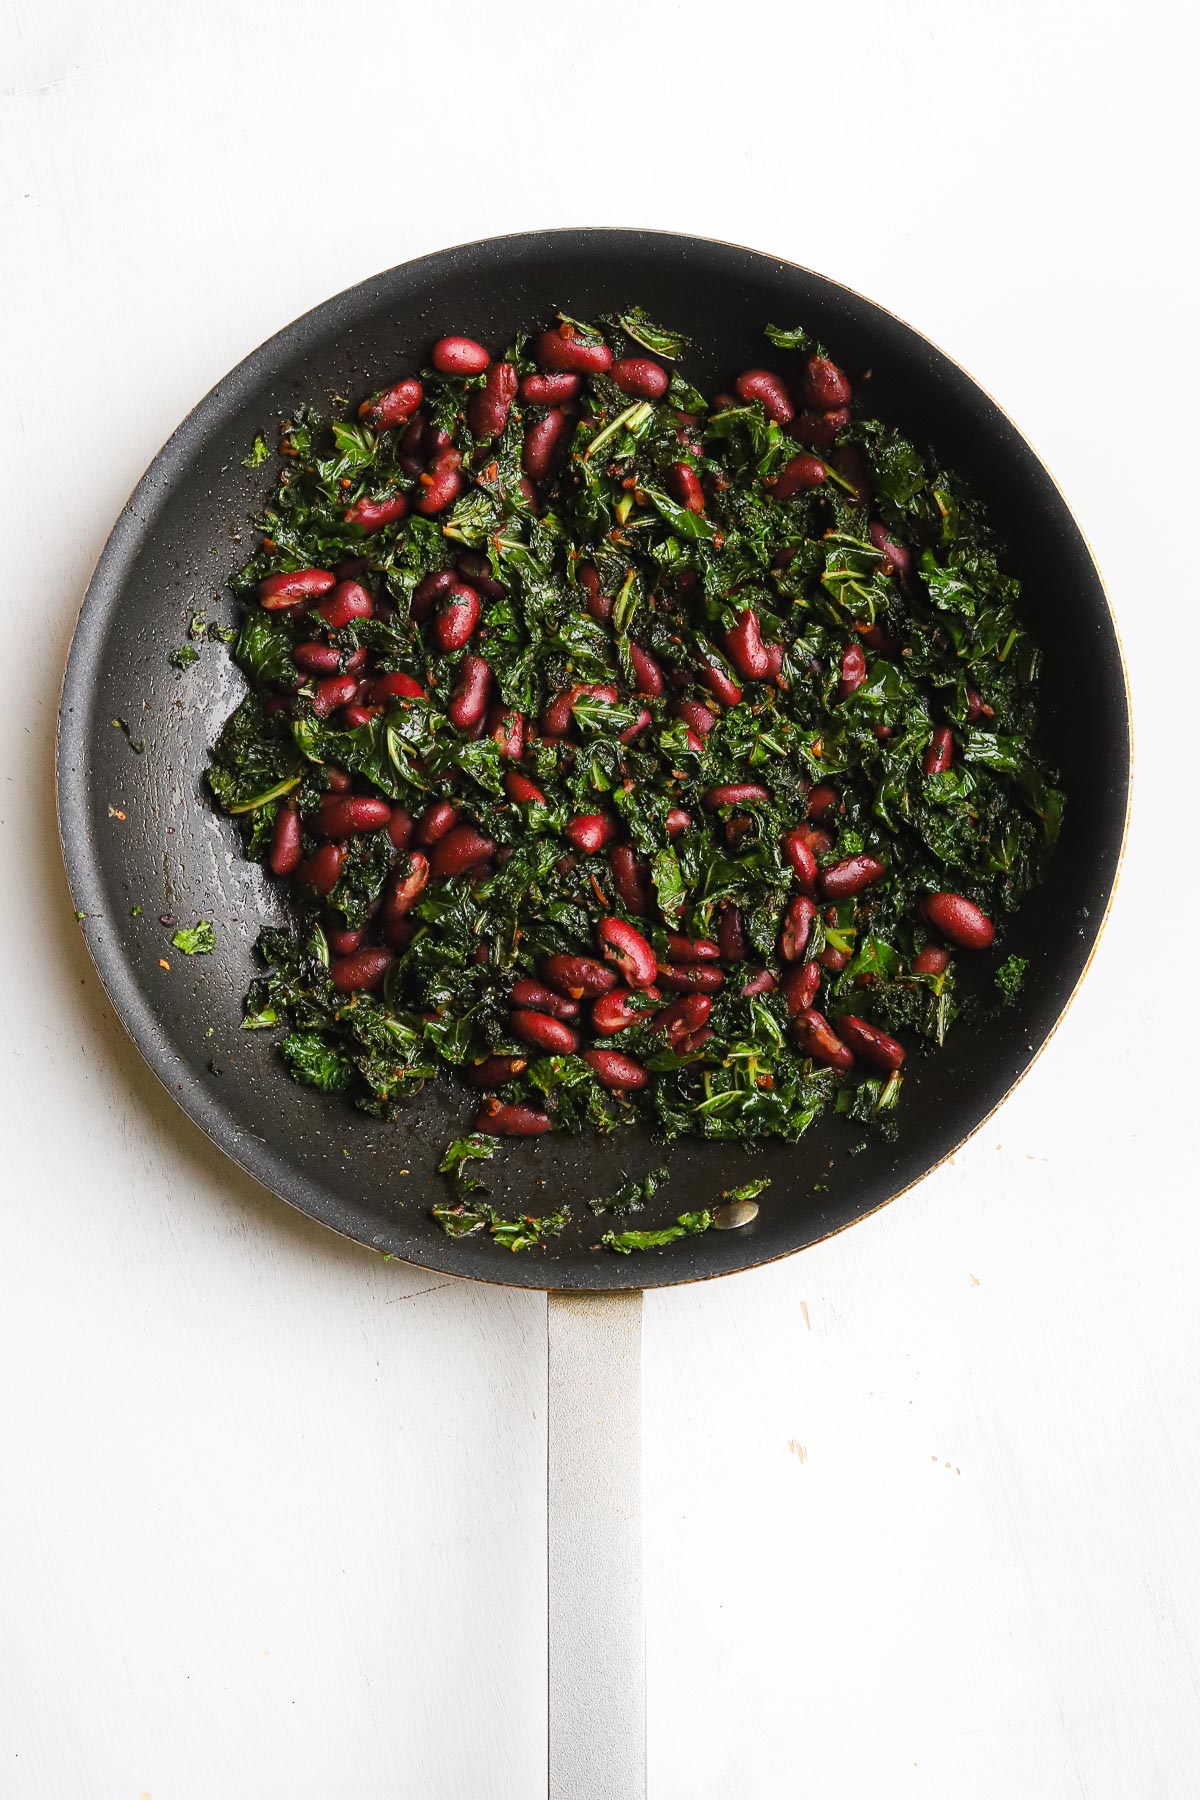 KIDNEY BEAN AND KALE TACOS